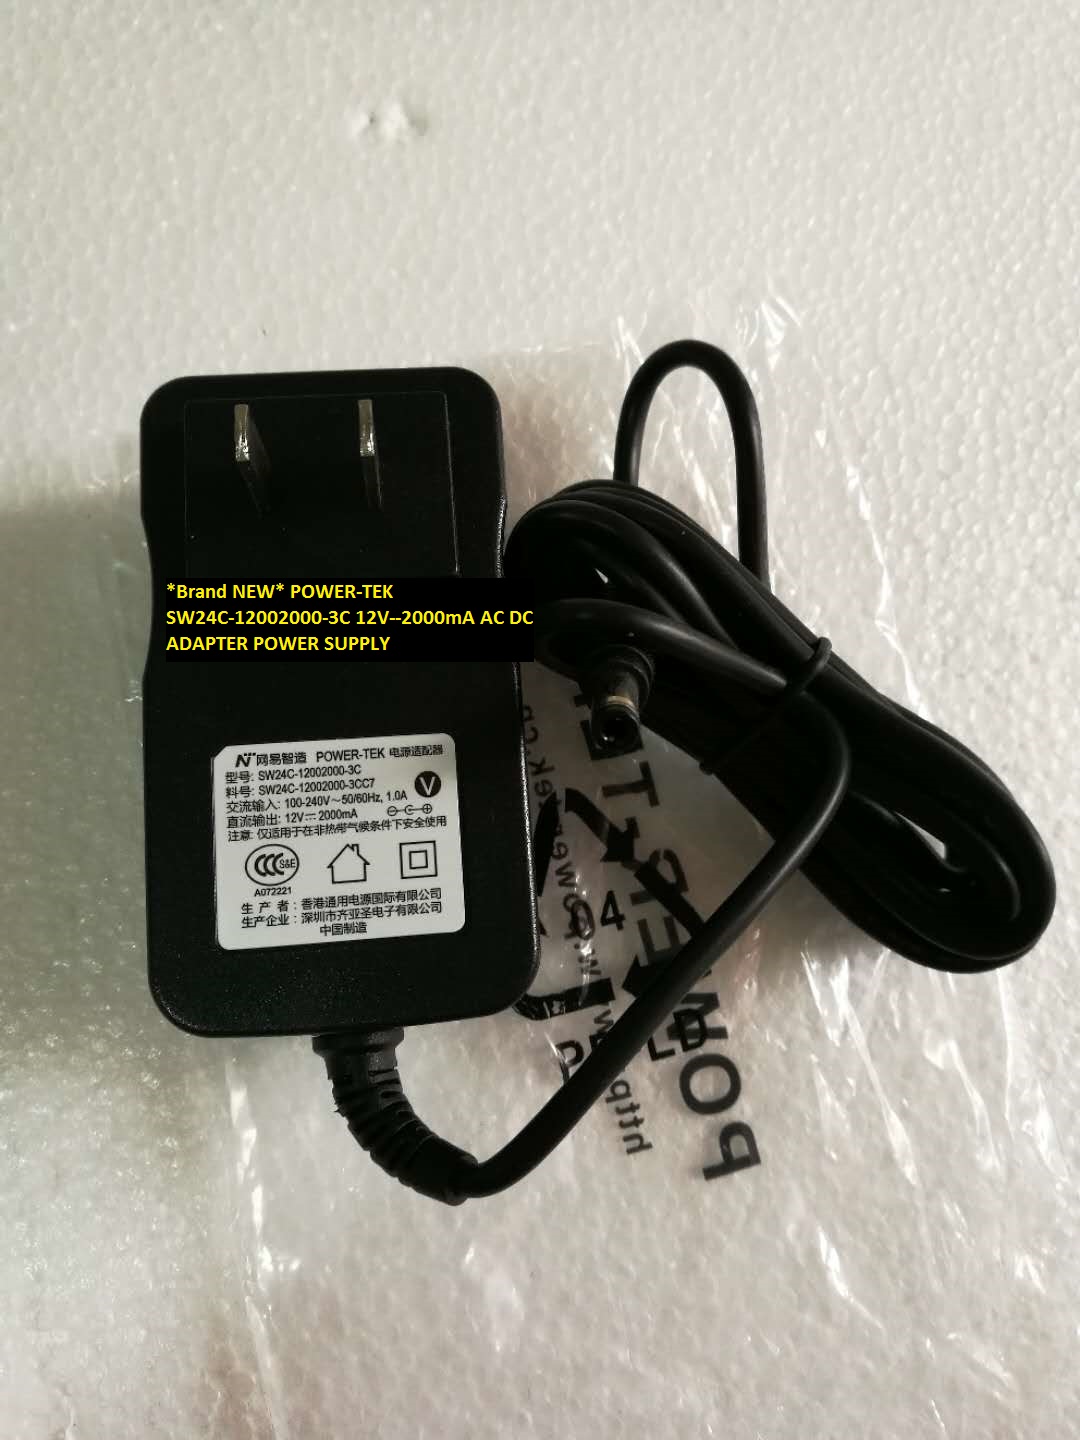 *Brand NEW* AC100-240V POWER-TEK SW24C-12002000-3C 12V--2000mA AC DC ADAPTER POWER SUPPLY - Click Image to Close